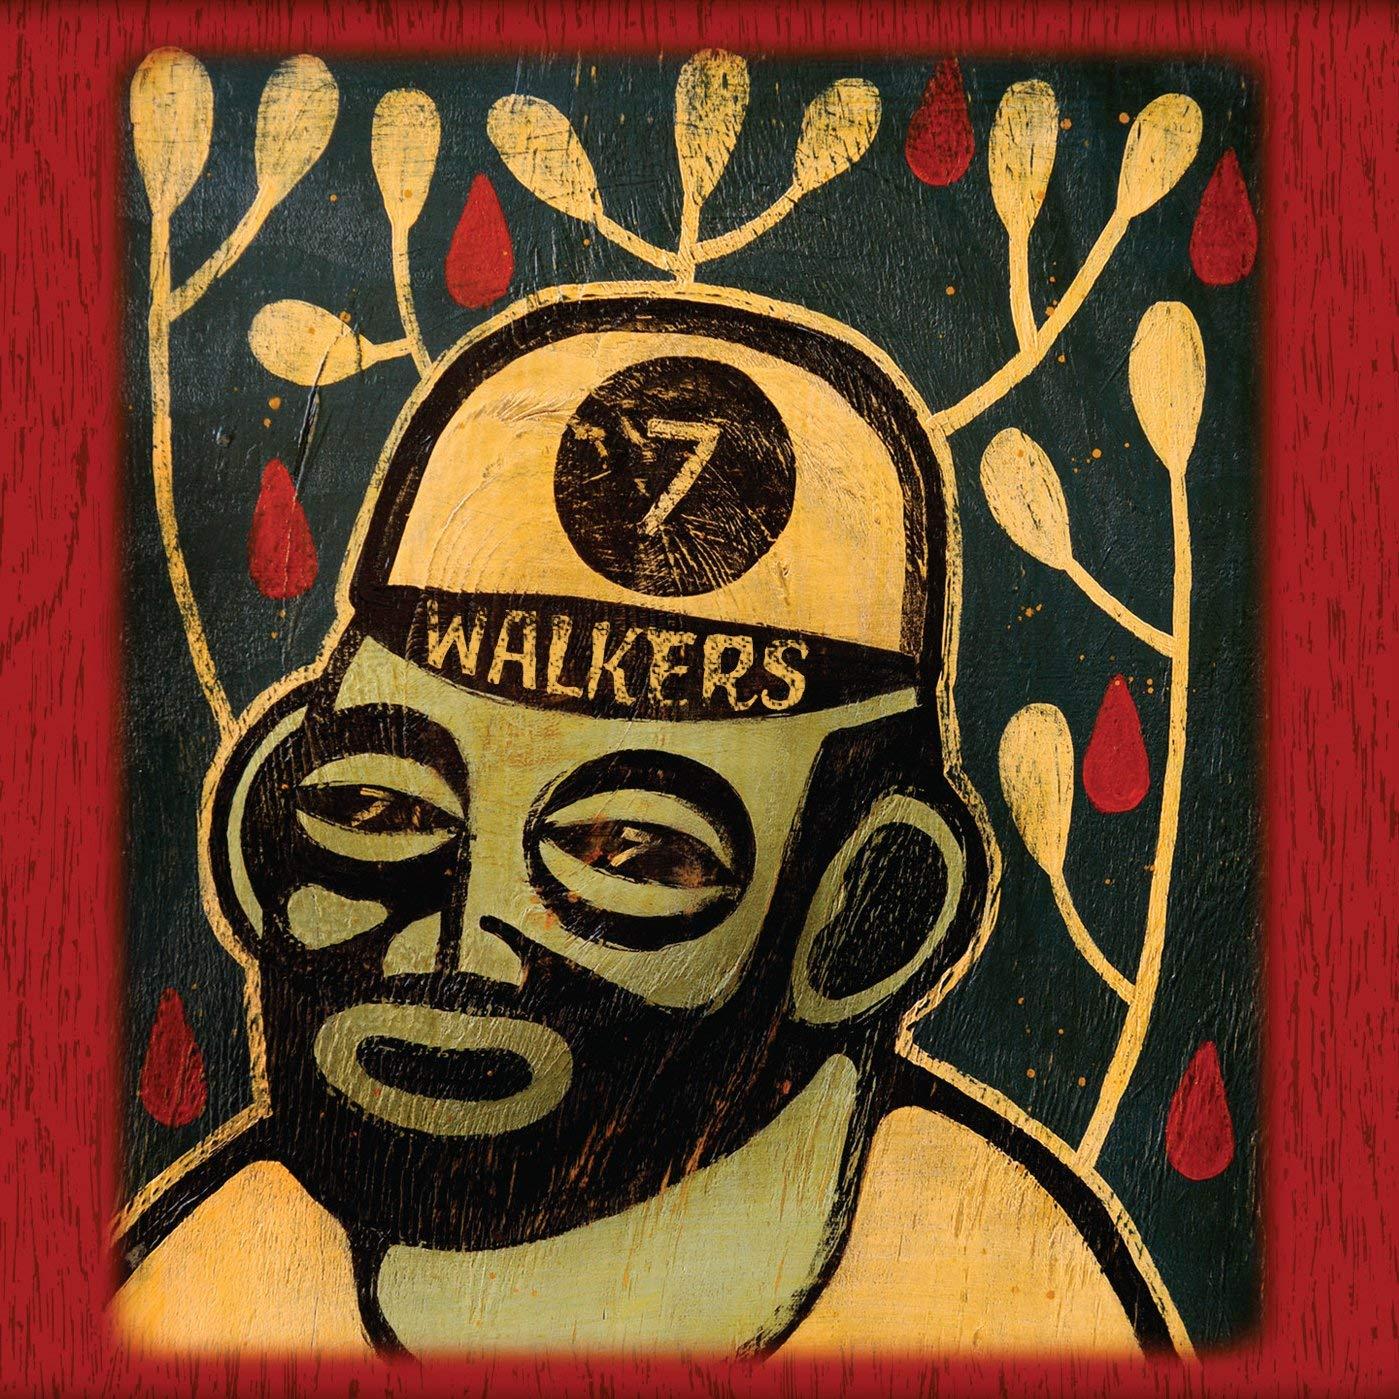 7 Walkers - same feat. Willie Nelson